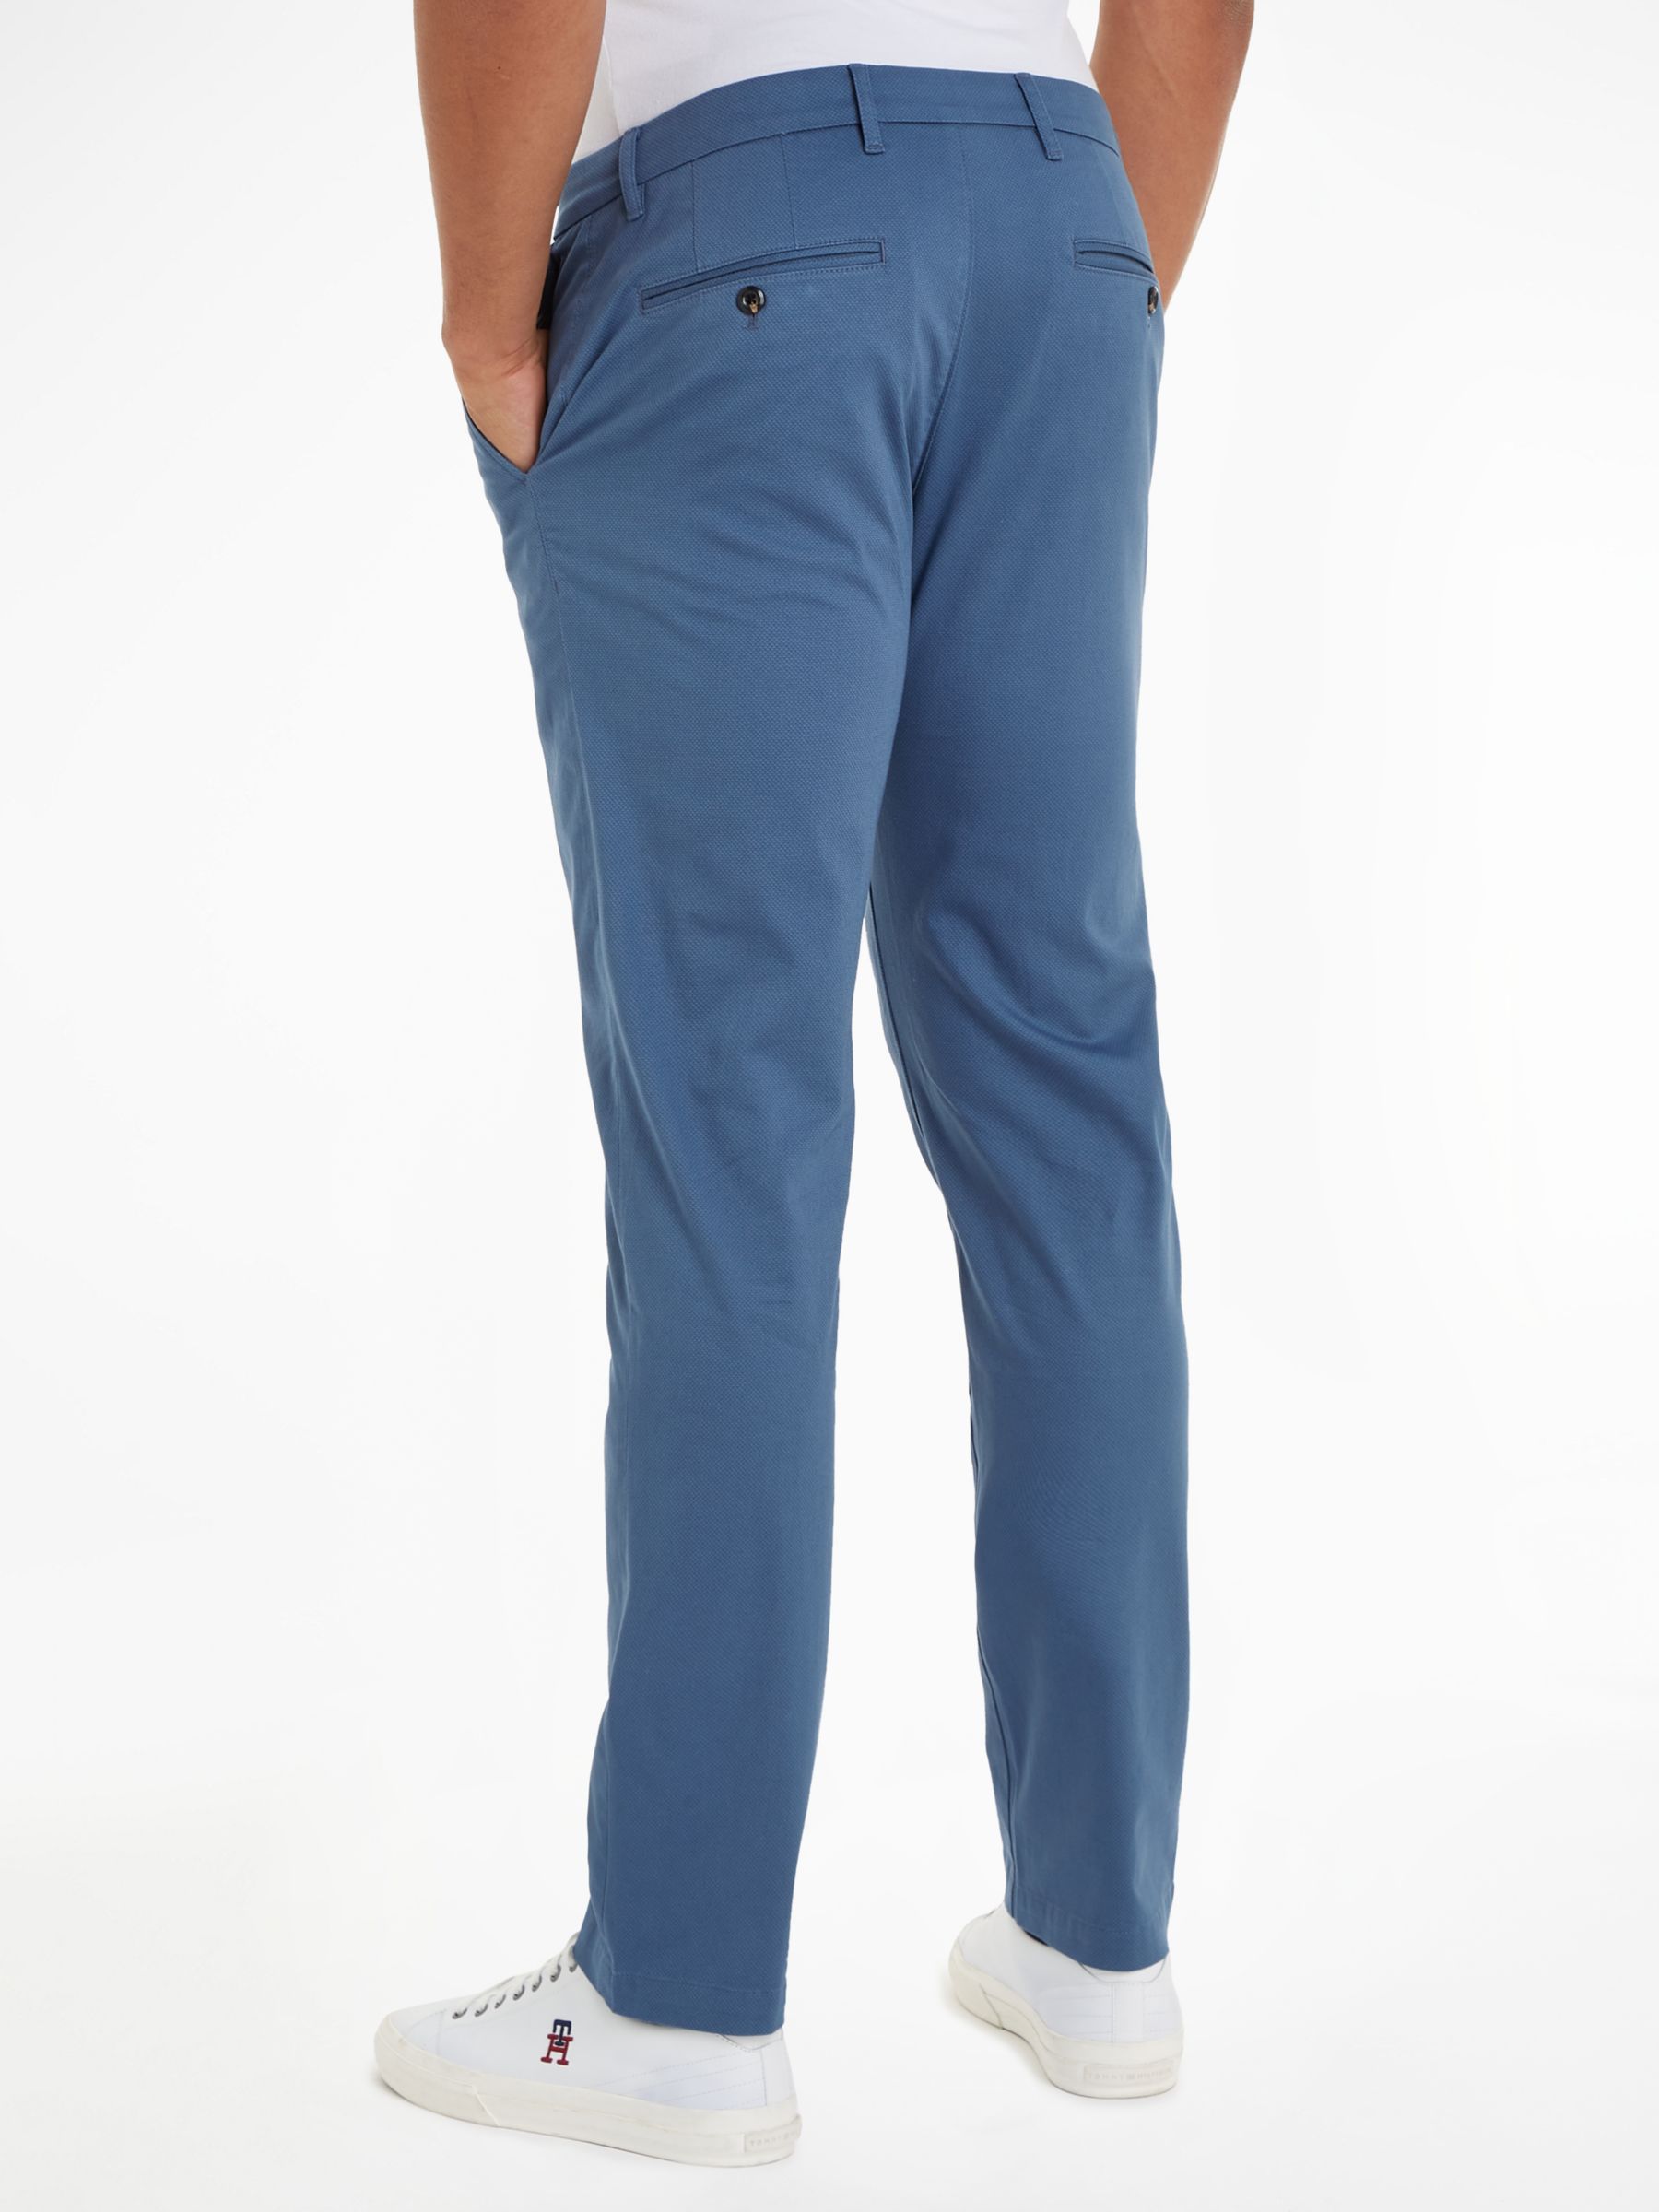 Buy Tommy Hilfiger Denton Structure Chino Trousers Online at johnlewis.com